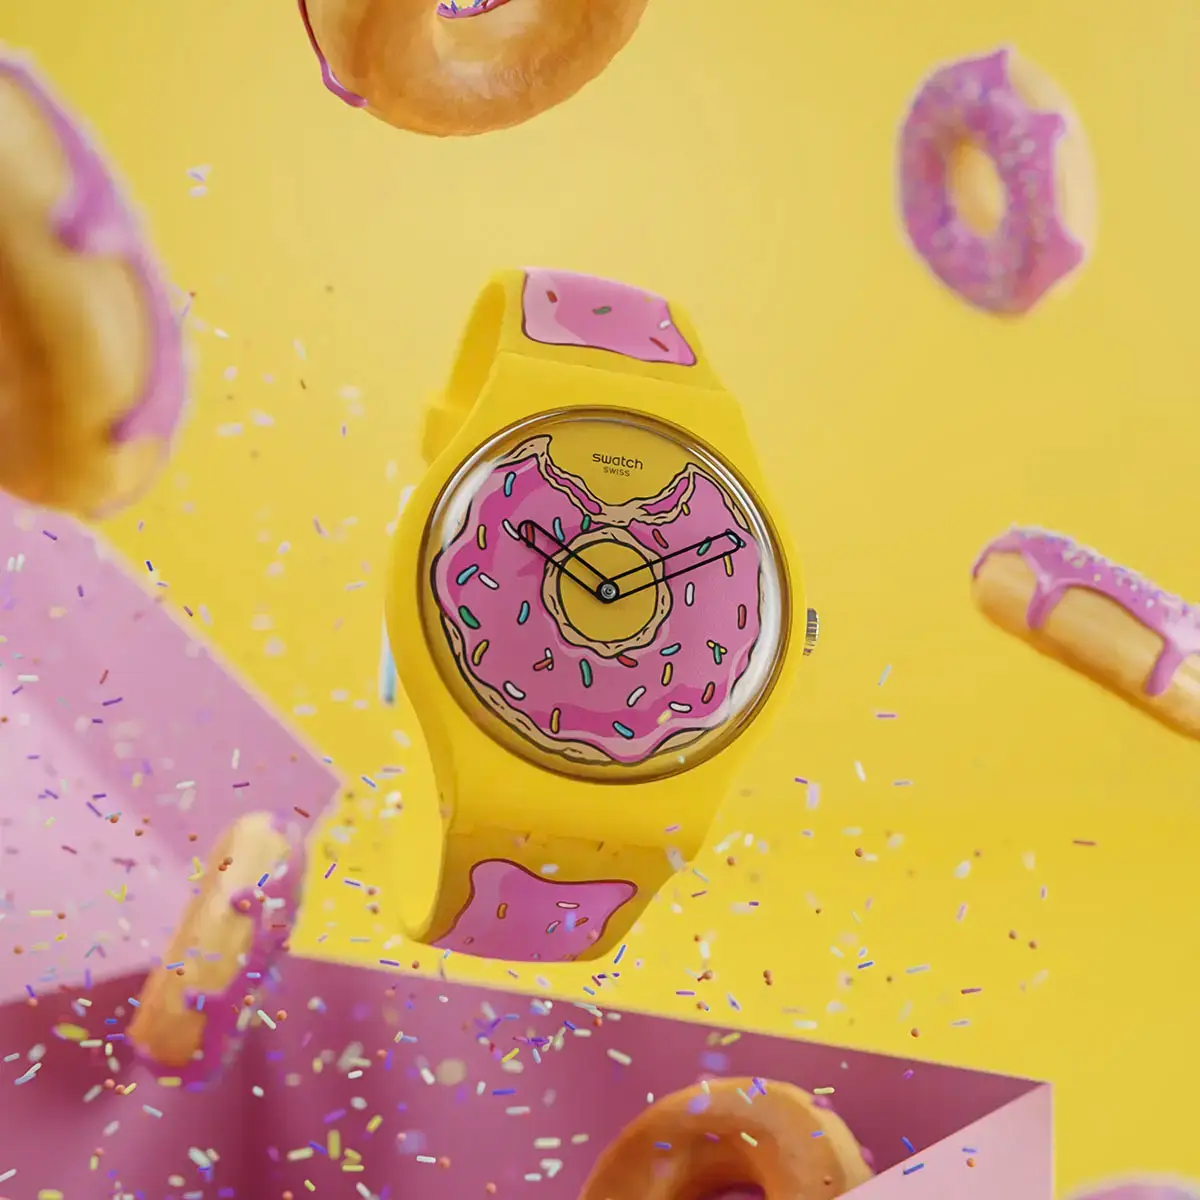 The Simpsons Sweet Seconds Swatch